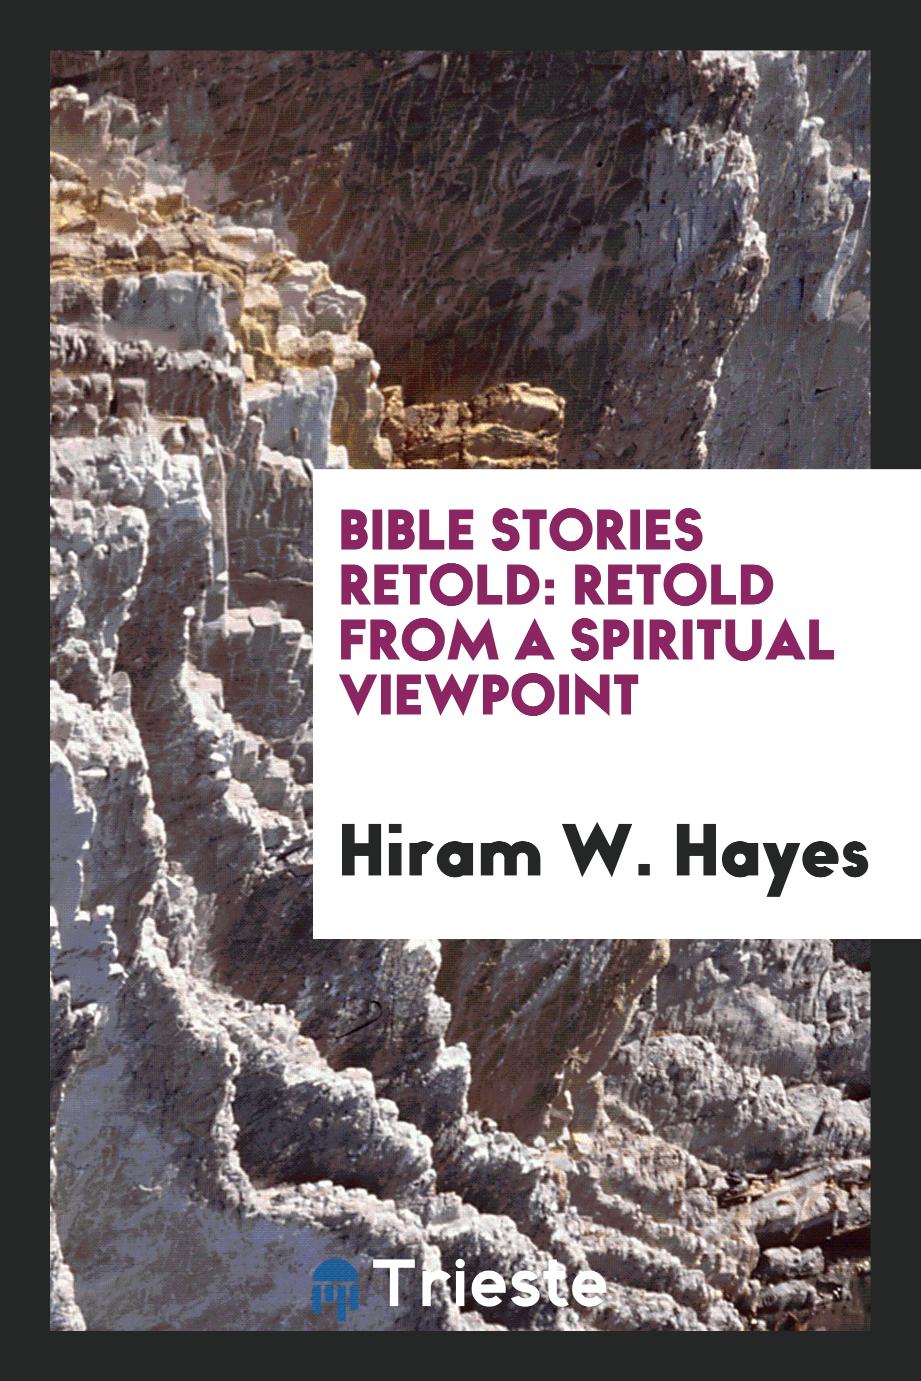 Bible Stories Retold: Retold from a Spiritual Viewpoint